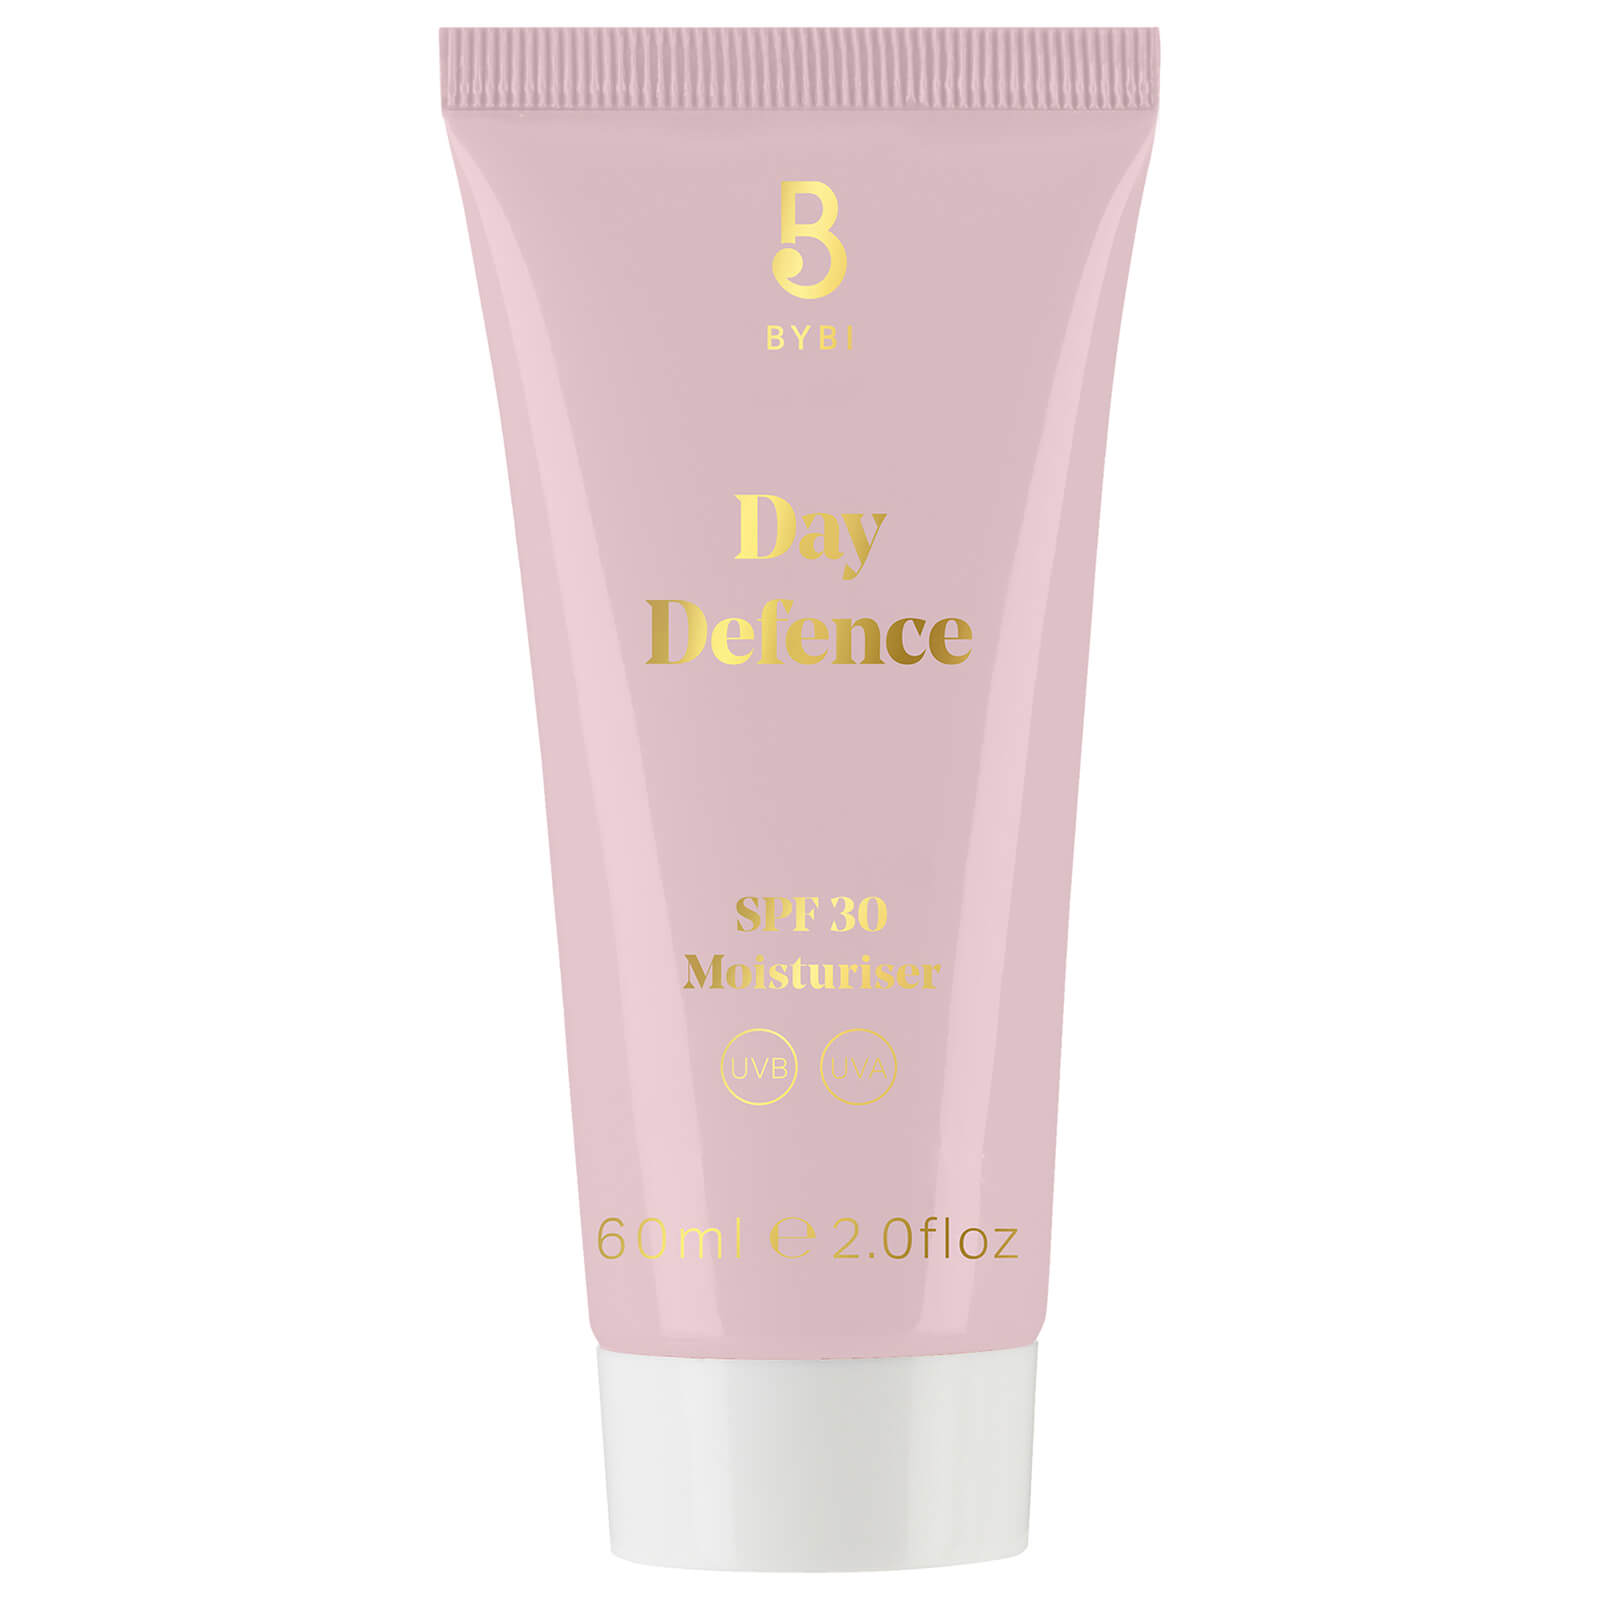 BYBI Beauty Day Defence Cream SPF 30 60ml